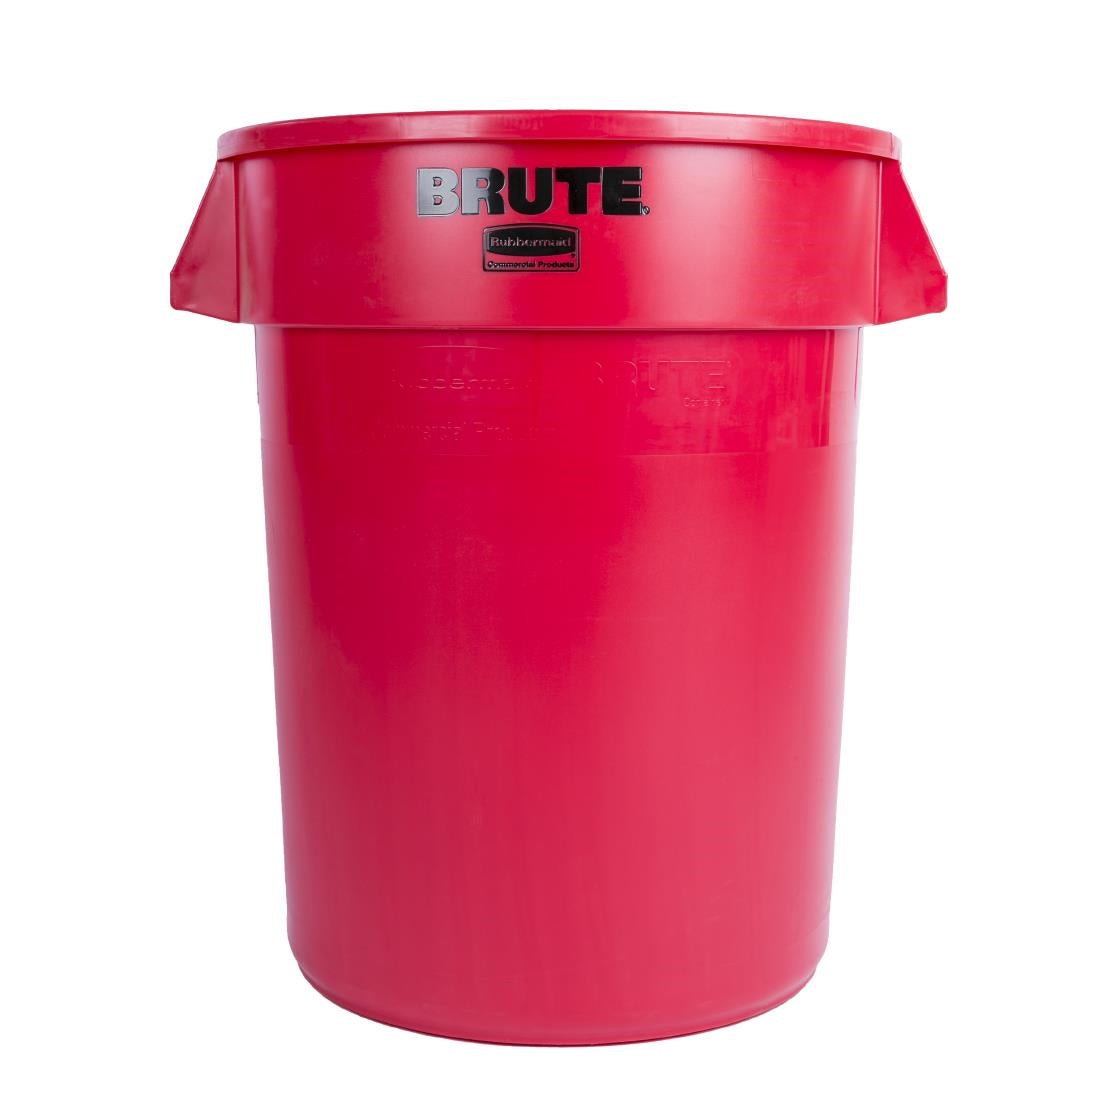 DN849 Rubbermaid Brute Utility Container Red 121Ltr